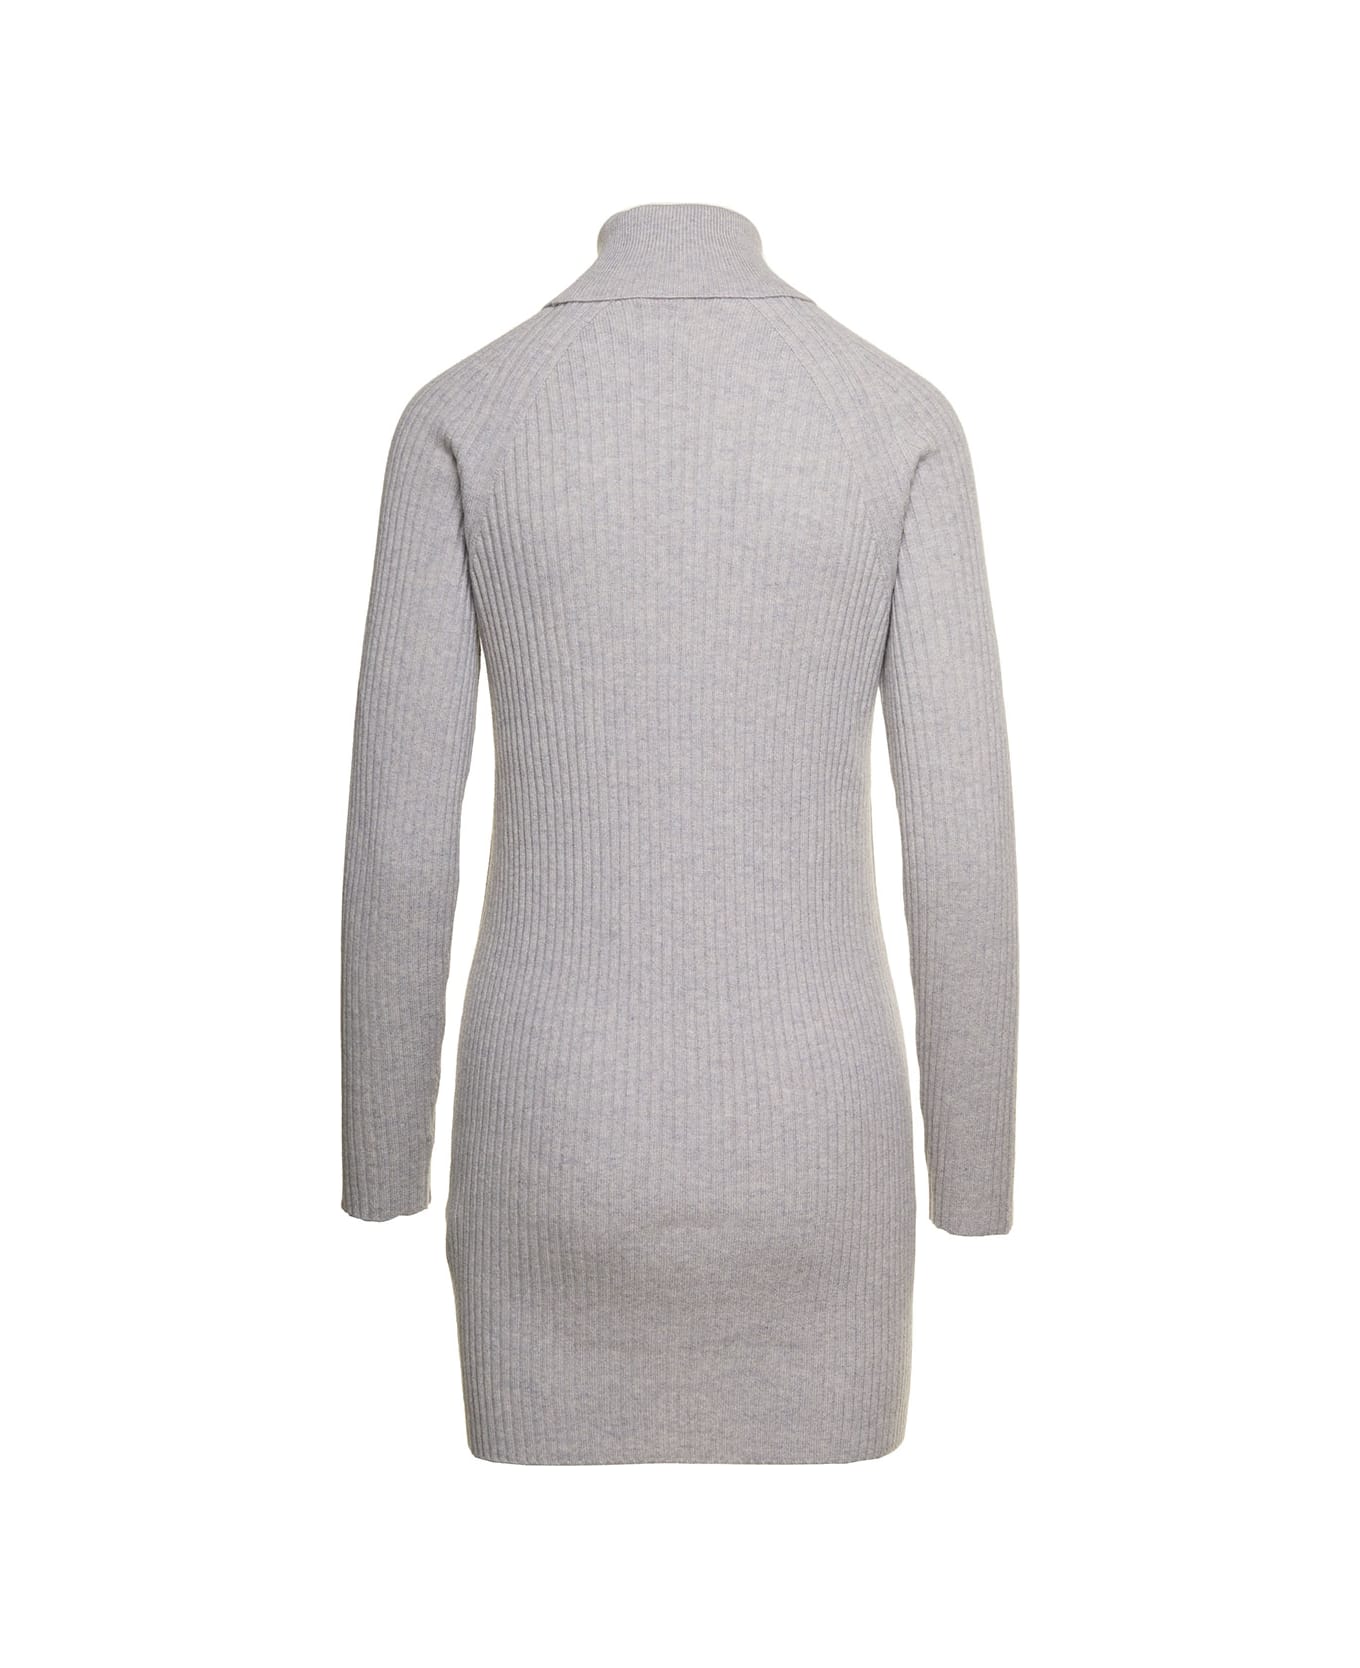 Antonelli Midi Grey Ribbed Dress In Wool. Silk And Cotton Blend Woman - Grey